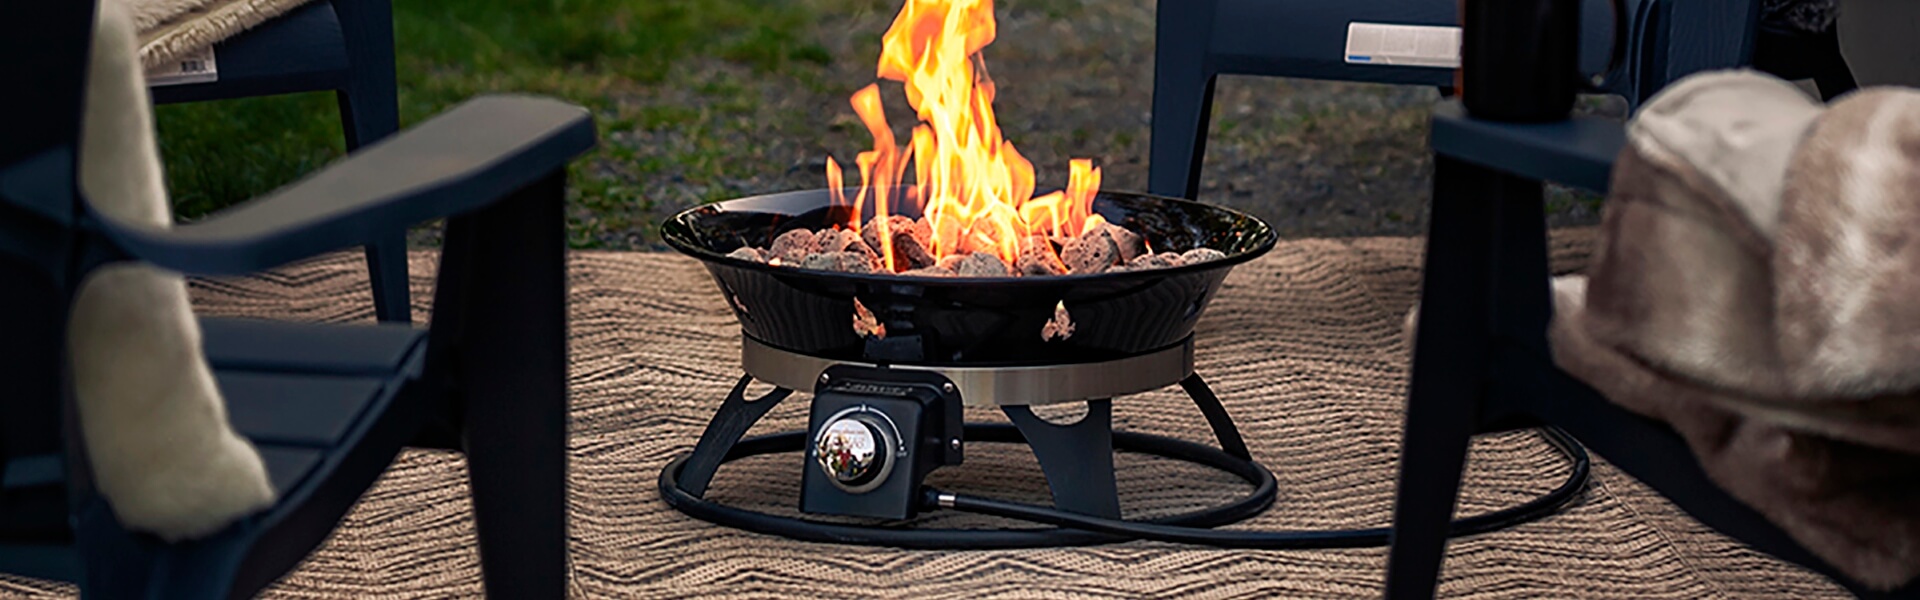 7 Best Fire Pits under $200 Reviewed (Spring 2022)